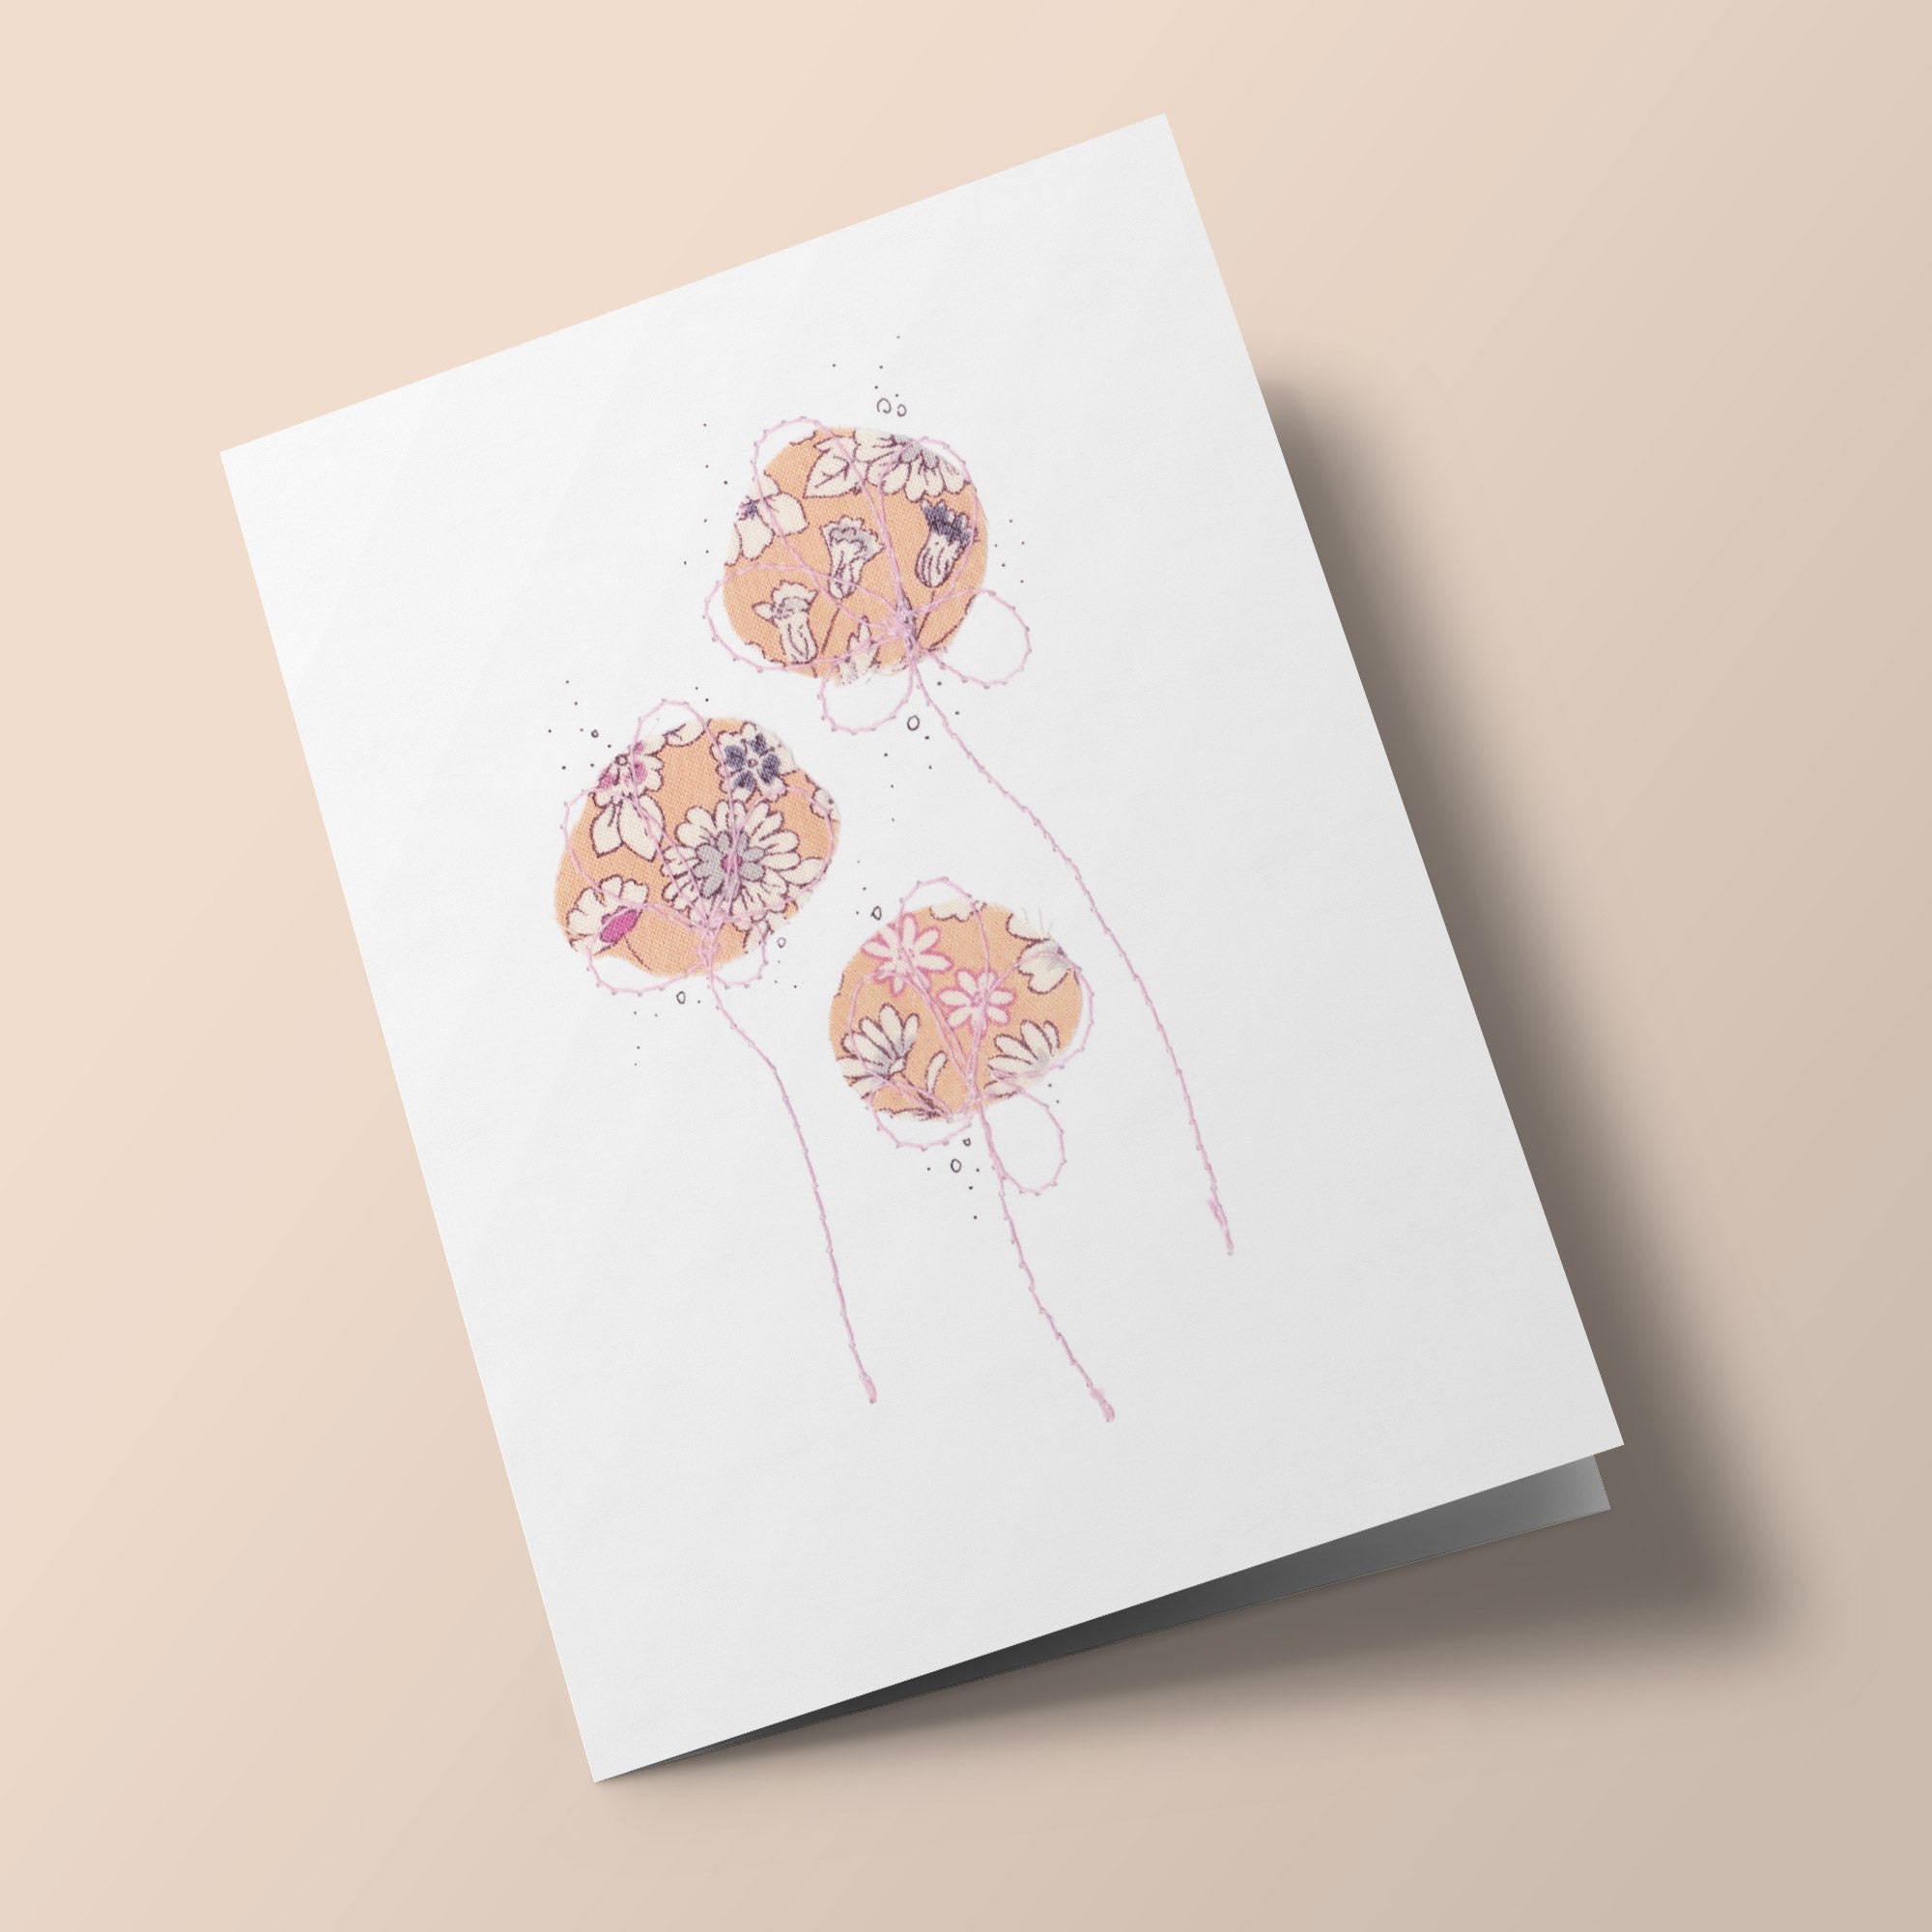 Cotton Flowers - Powder Roses - embroidered card